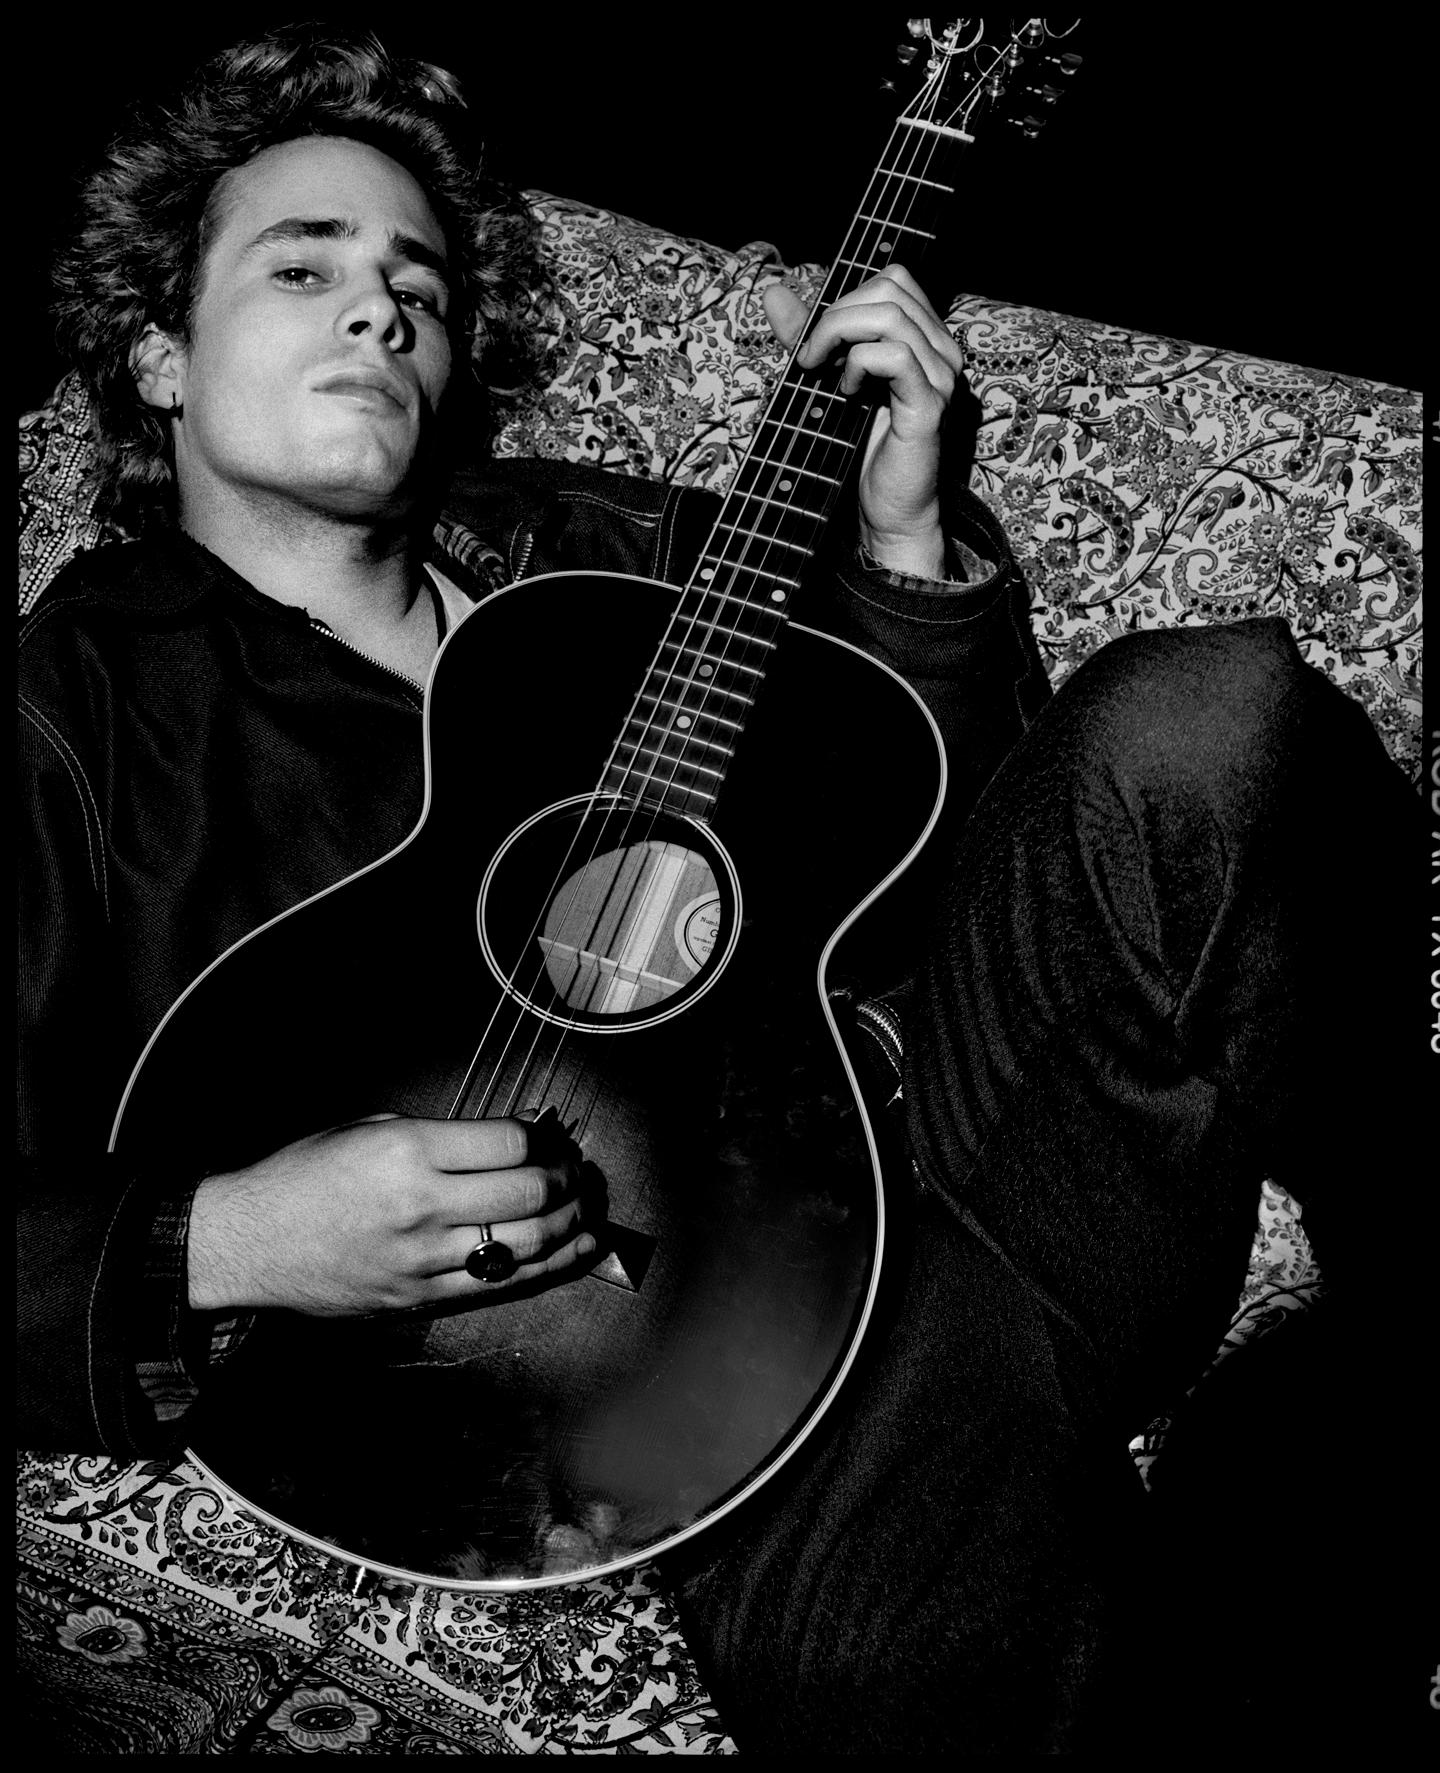 Jeff Buckley 

2022

by Kevin Westenberg
Signed Limited Edition

Kevin Westenberg is famed for his creation of provocative and electrifying images of world-class musicians, artists and movie stars for over 25 years.

His technique of lighting,